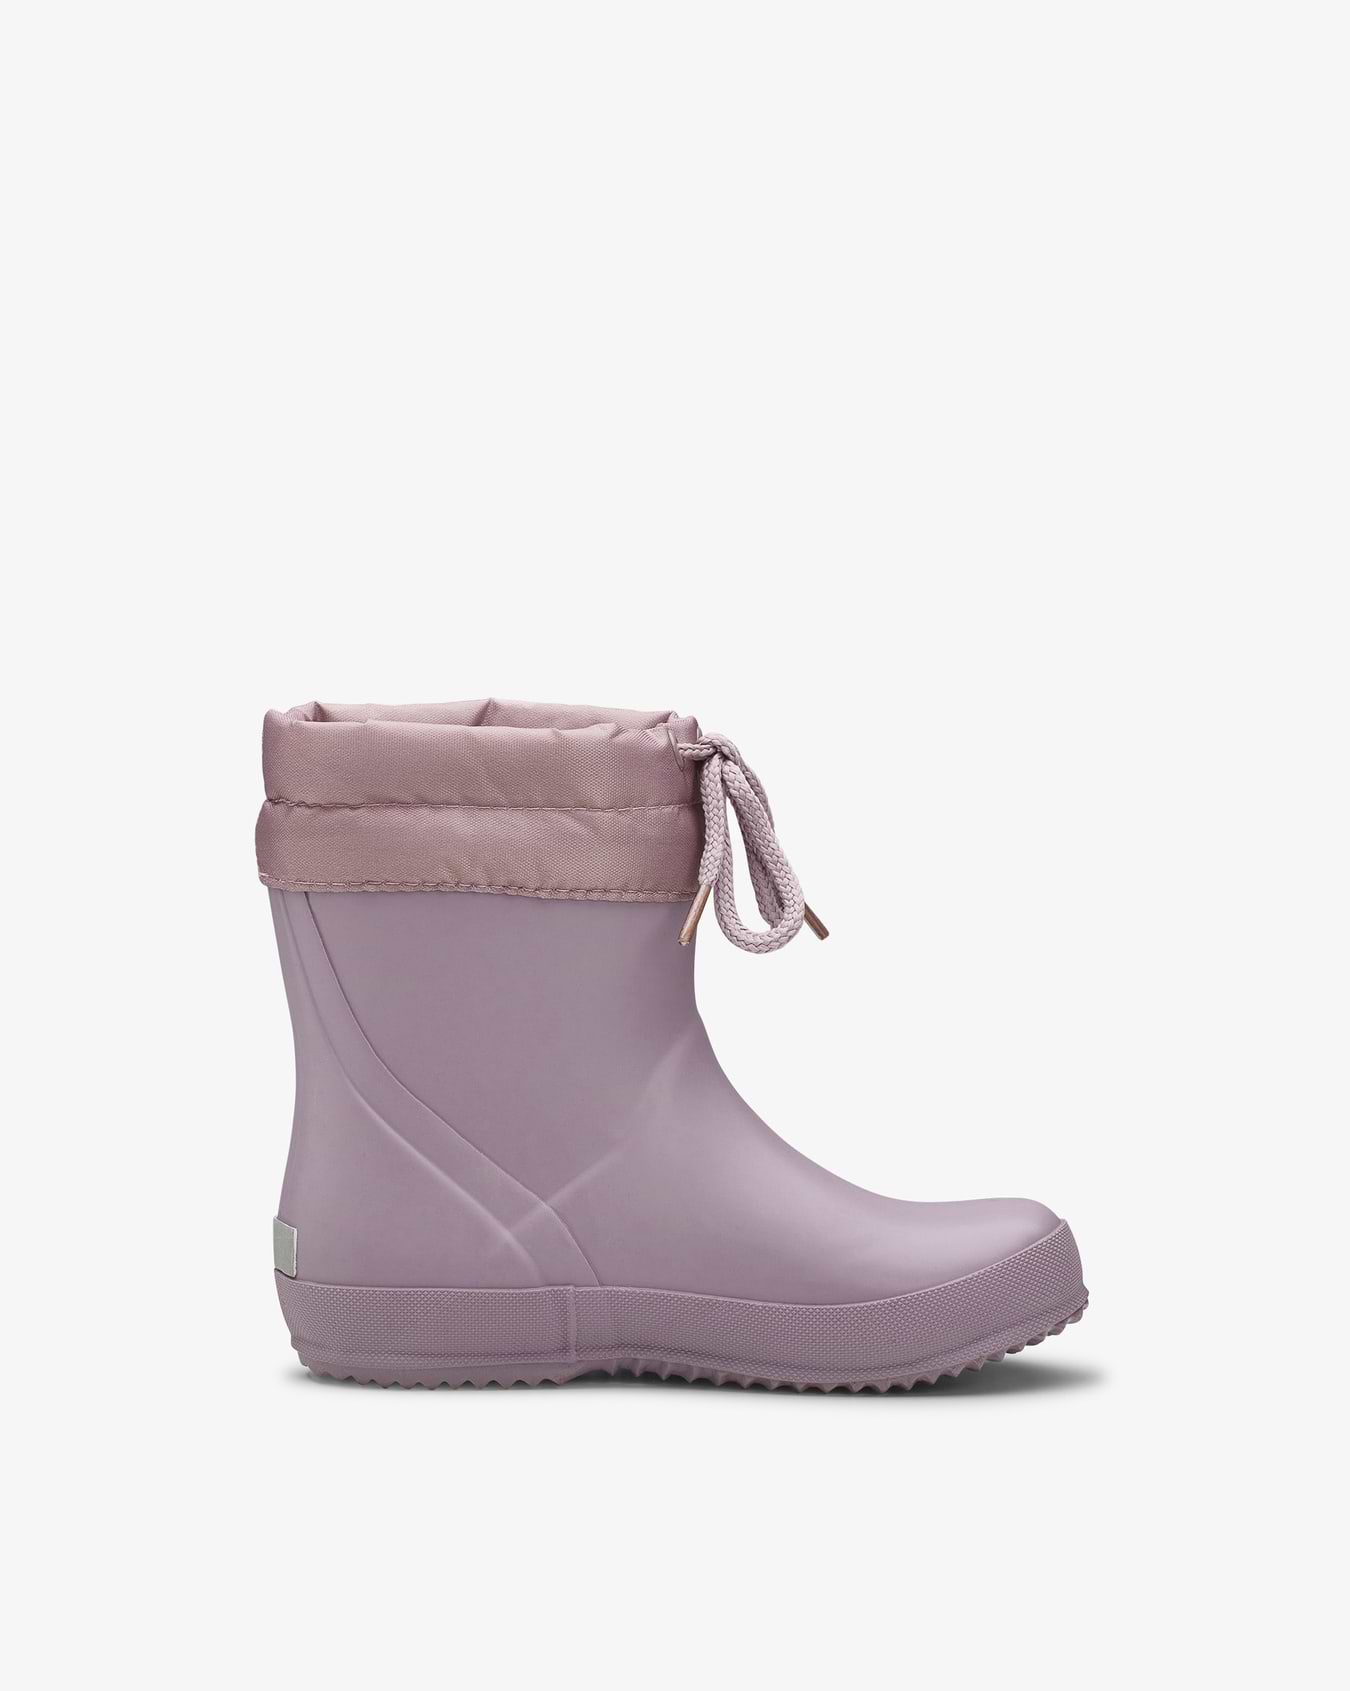 Alv Indie Dusty Pink/Light Pink Rubber Boot